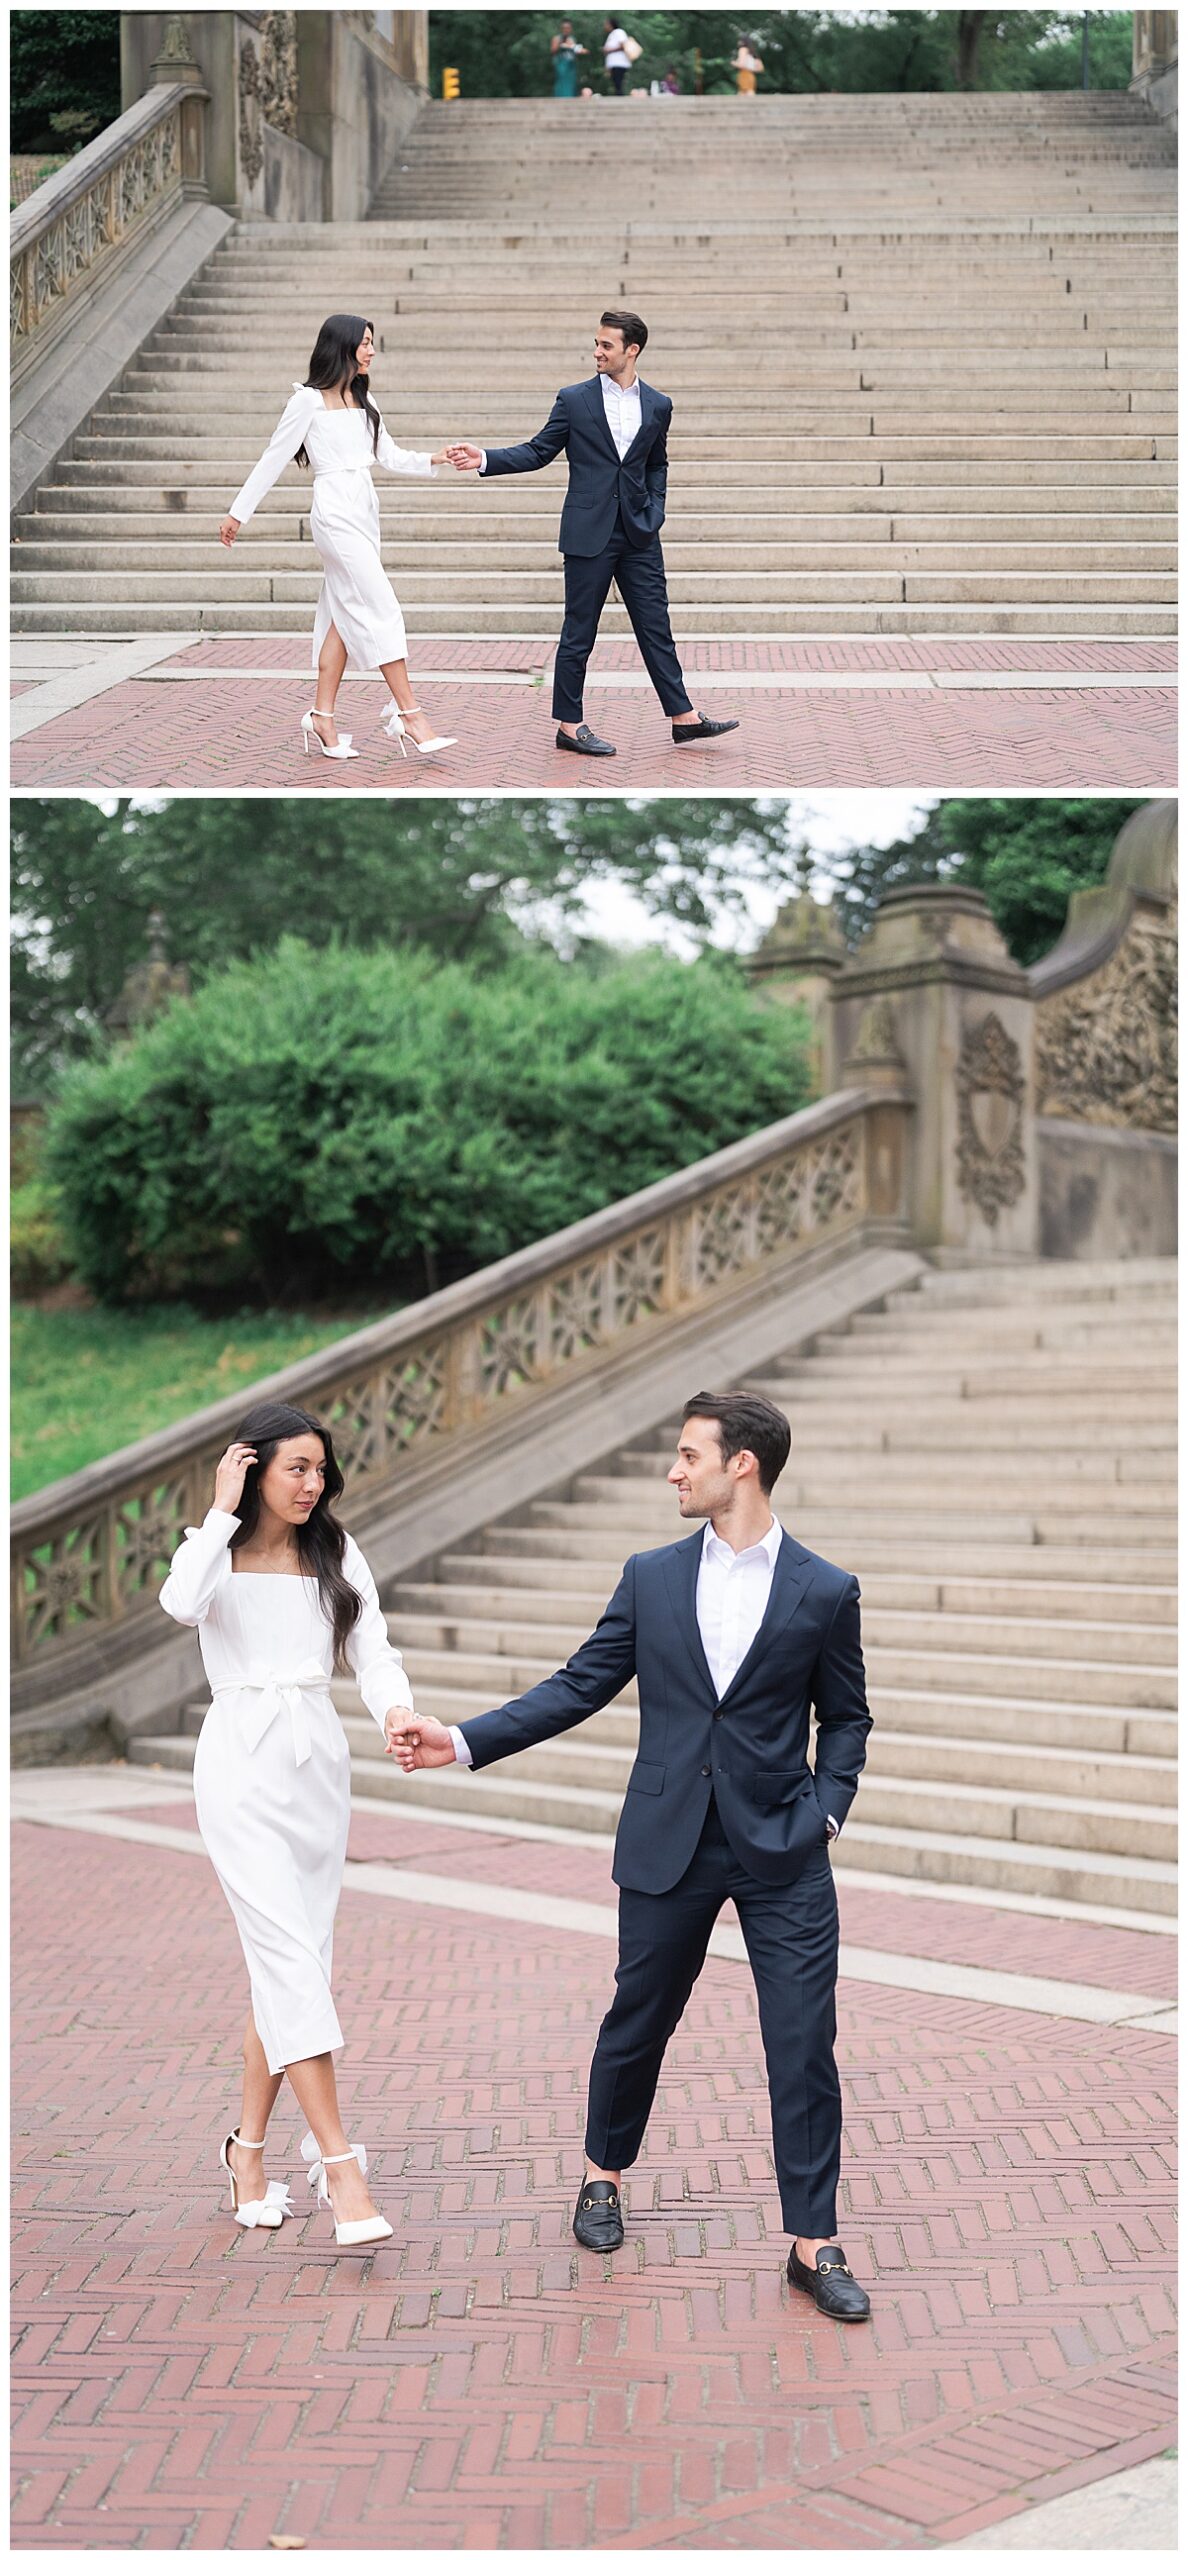 Couple walk the streets together for Houston’s Best Wedding Photographers